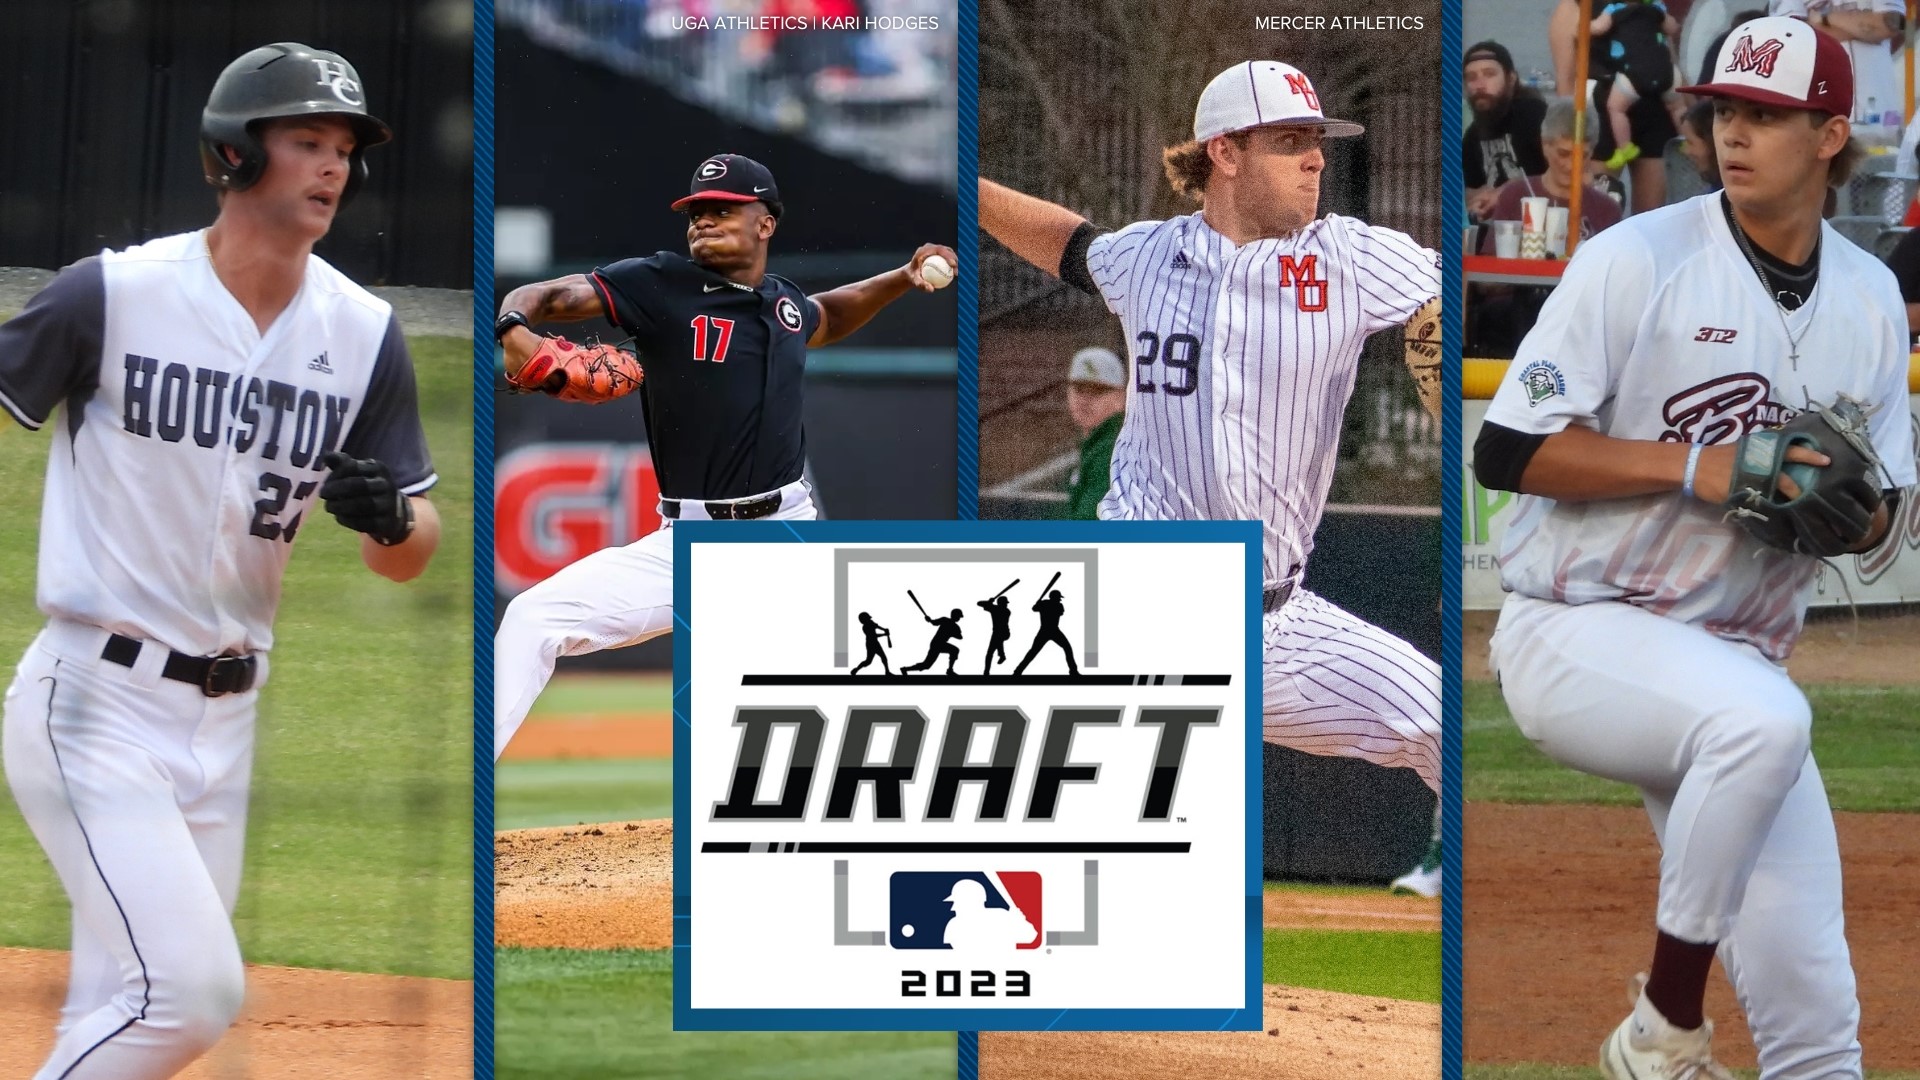 Four Central Georgia standouts in MLB draft